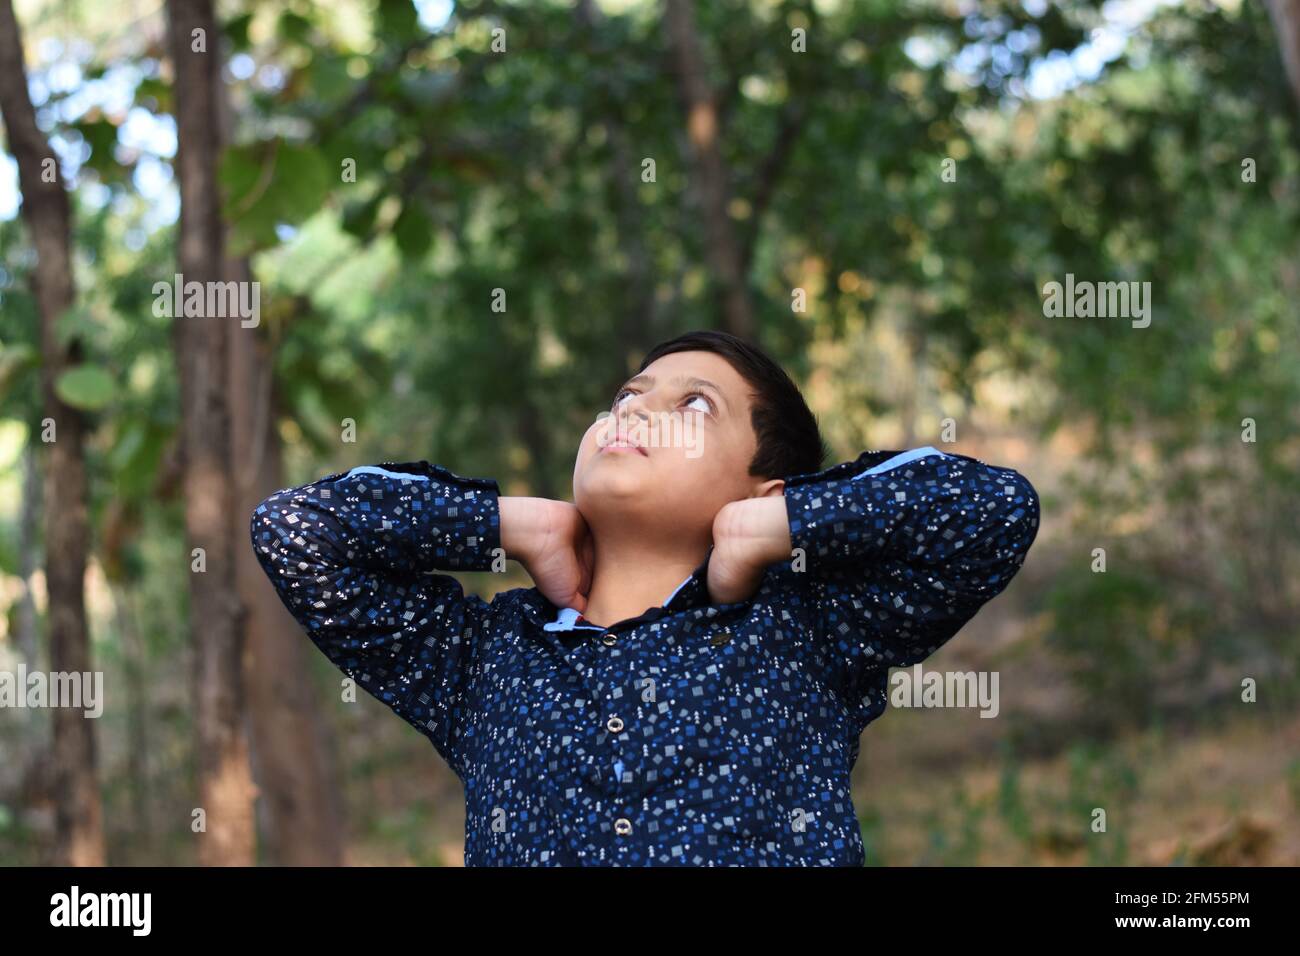 Young boy with hands on neck looking up Stock Photo